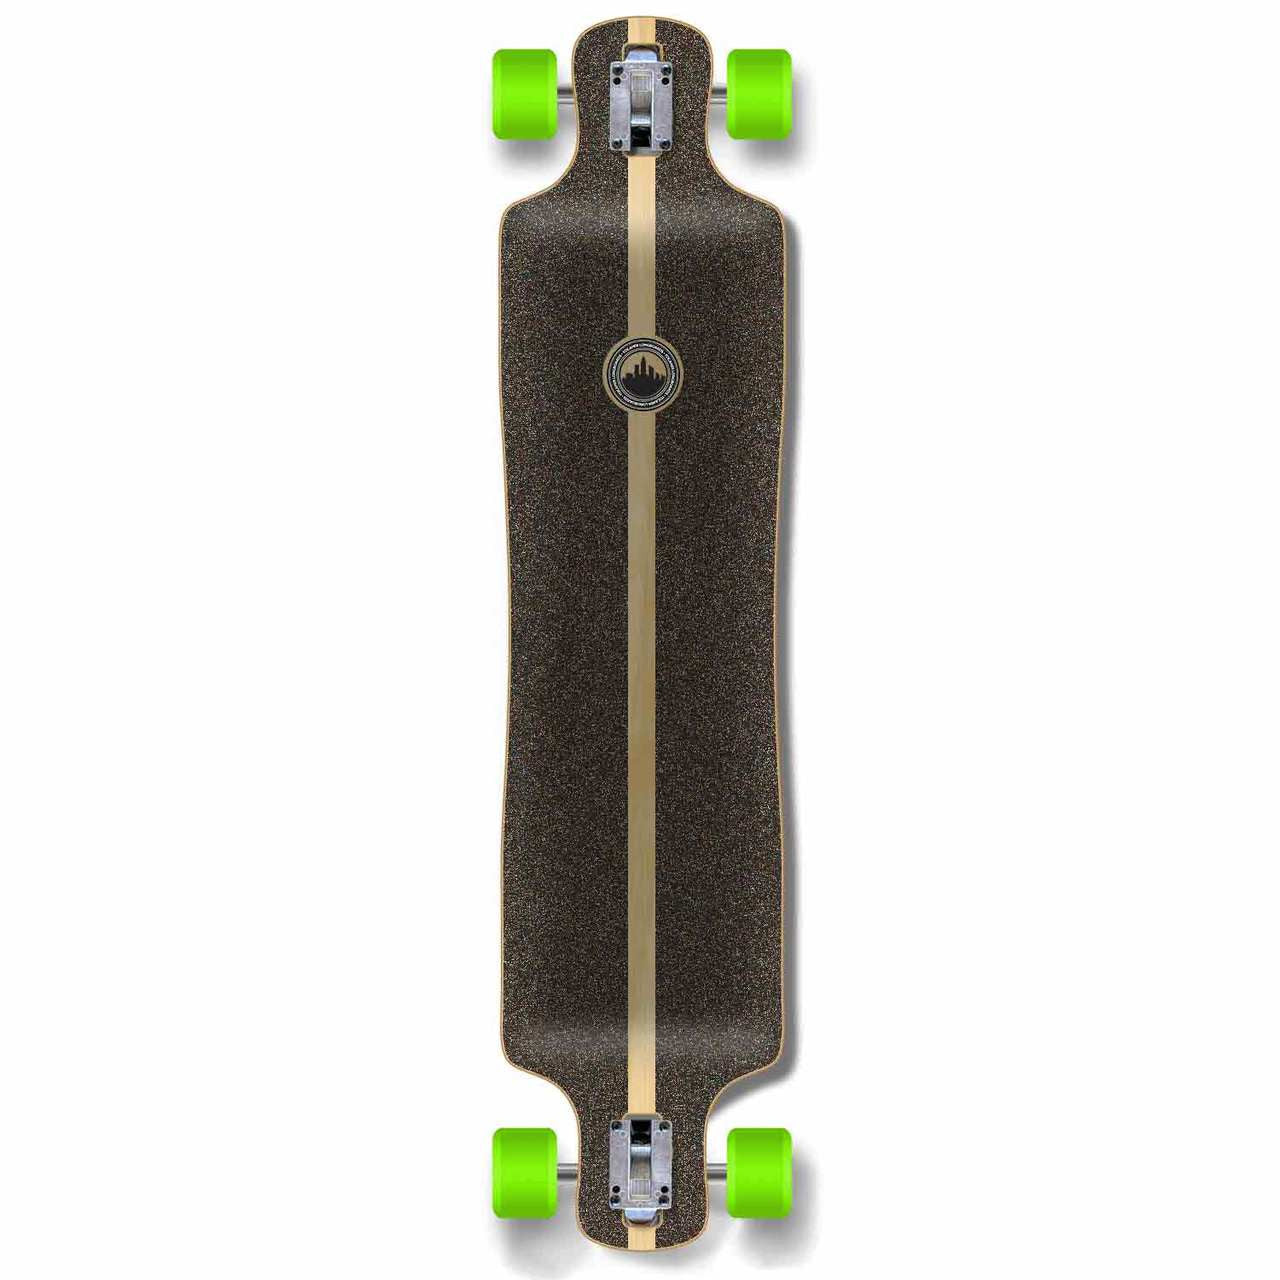 Yocaher Lowrider Longboard Complete - Stained Purple